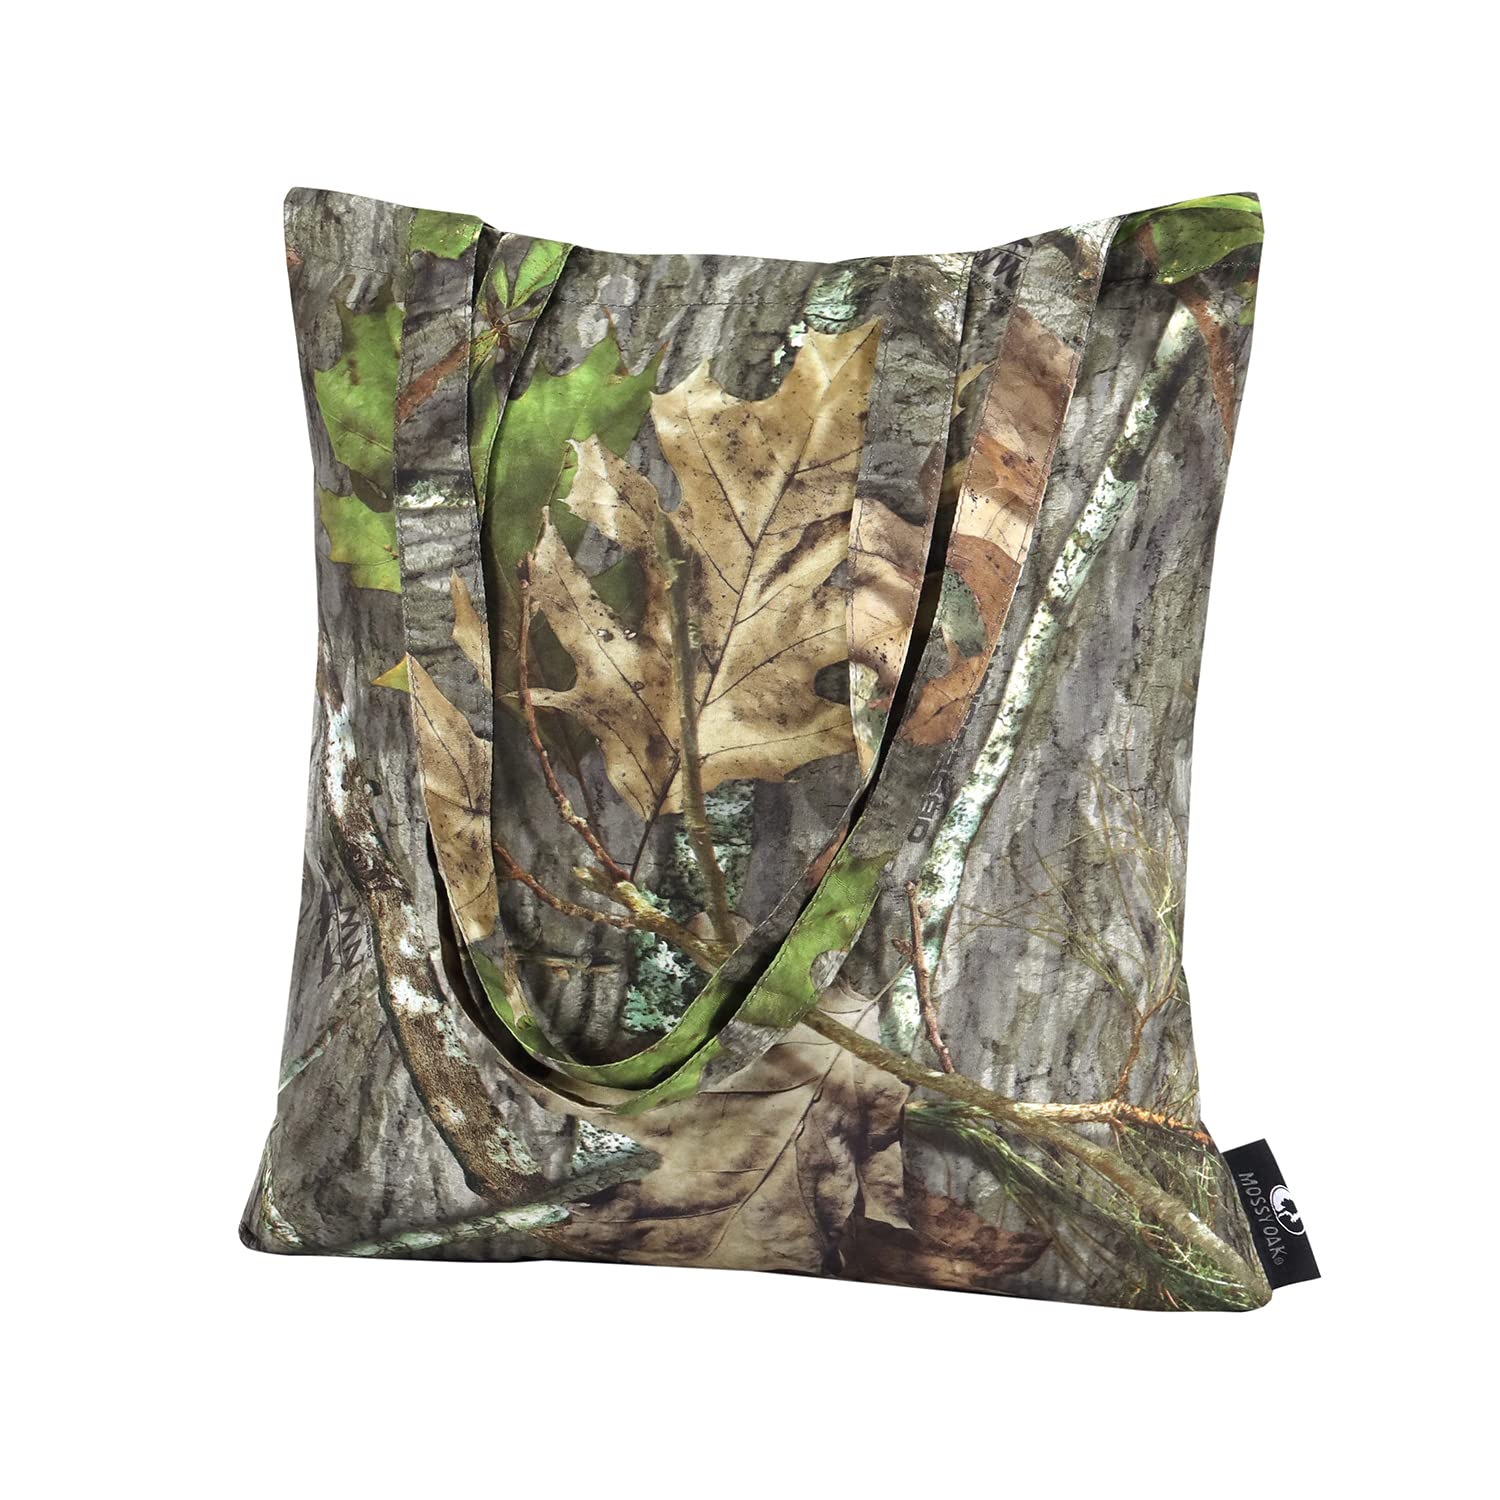 VISI-ONE Realtree Camo All Purpose Kitchen Reusable Grocery Tote Bag - Cloth Shopping Bag for Vegetables and Utility Bag – (15" x 16")